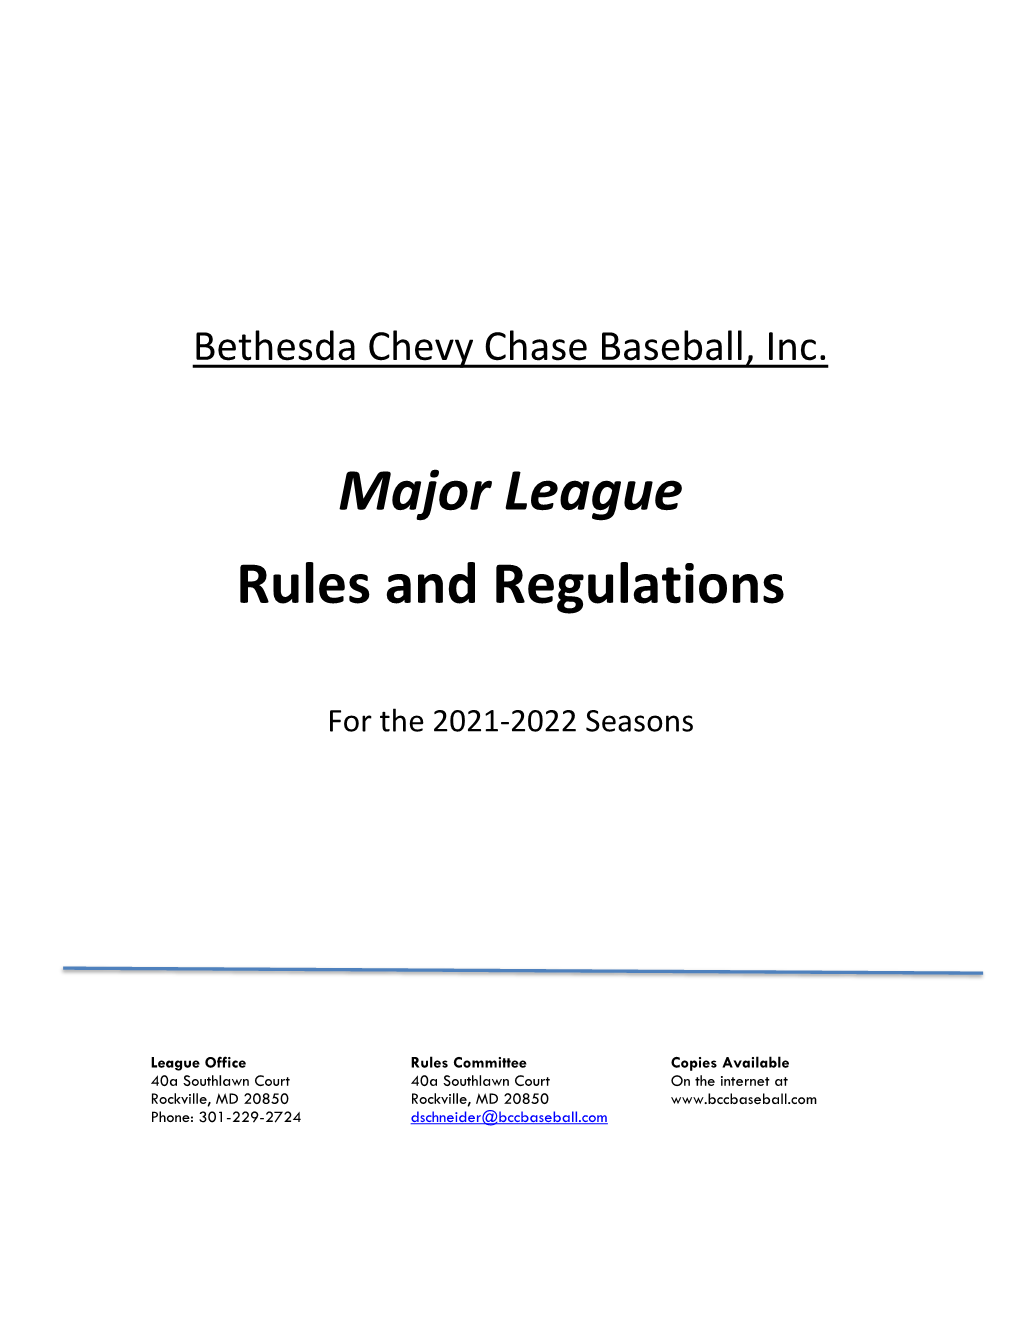 Major League Rules and Regulations